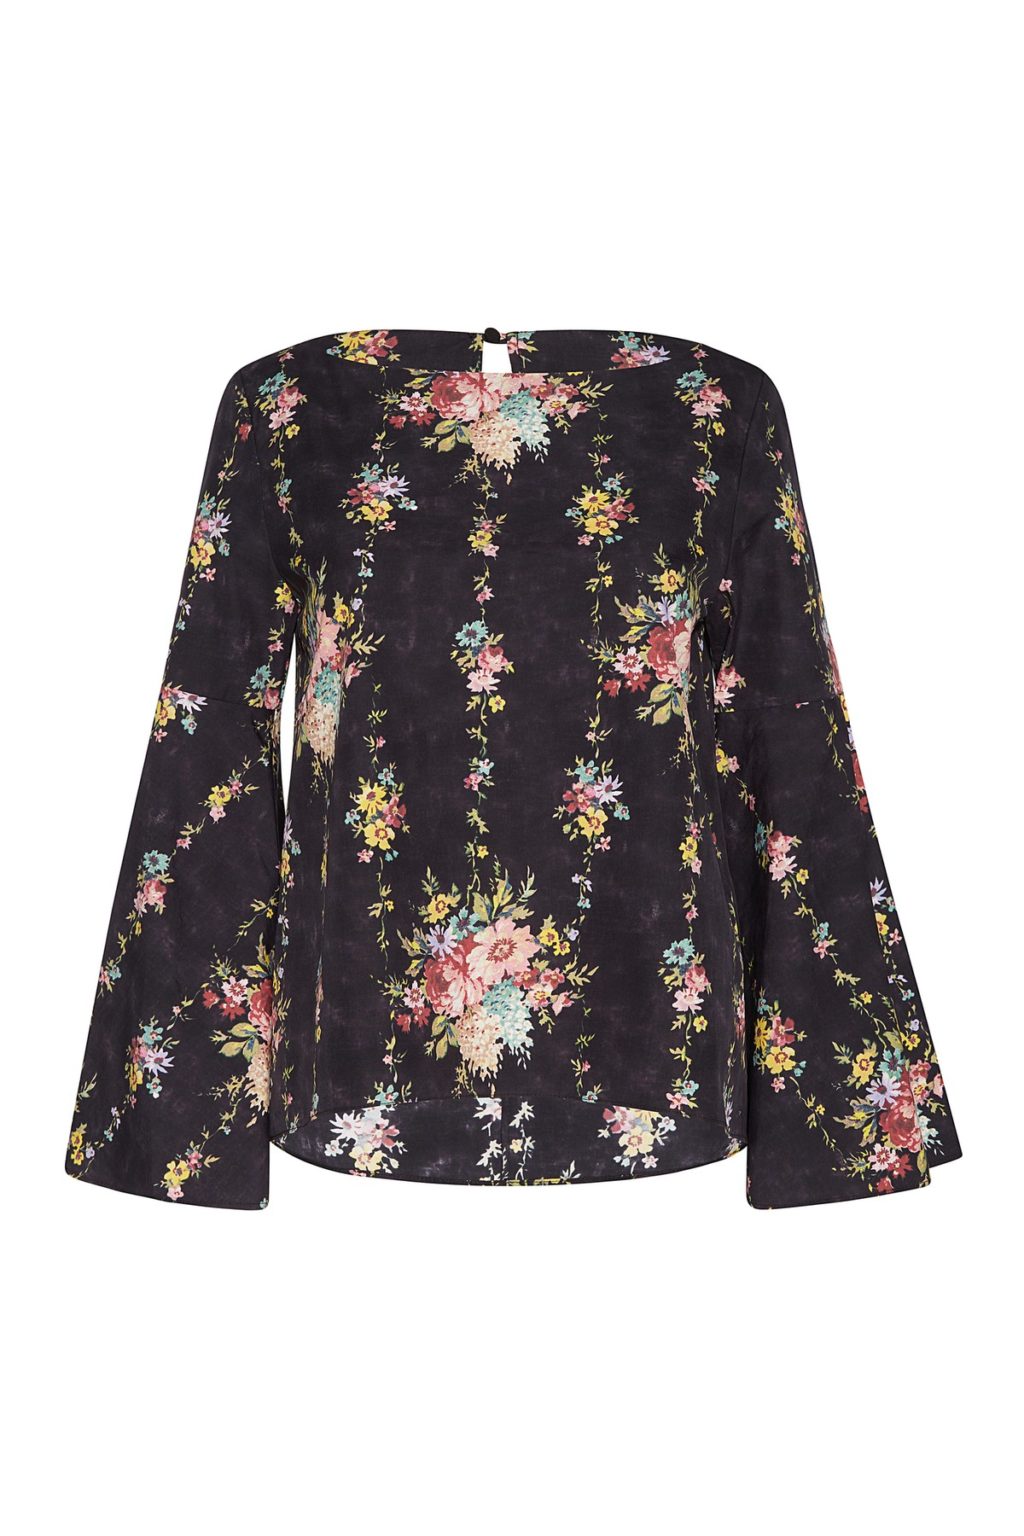 The Fashion Magpie Alice Olivia Floral Blouse